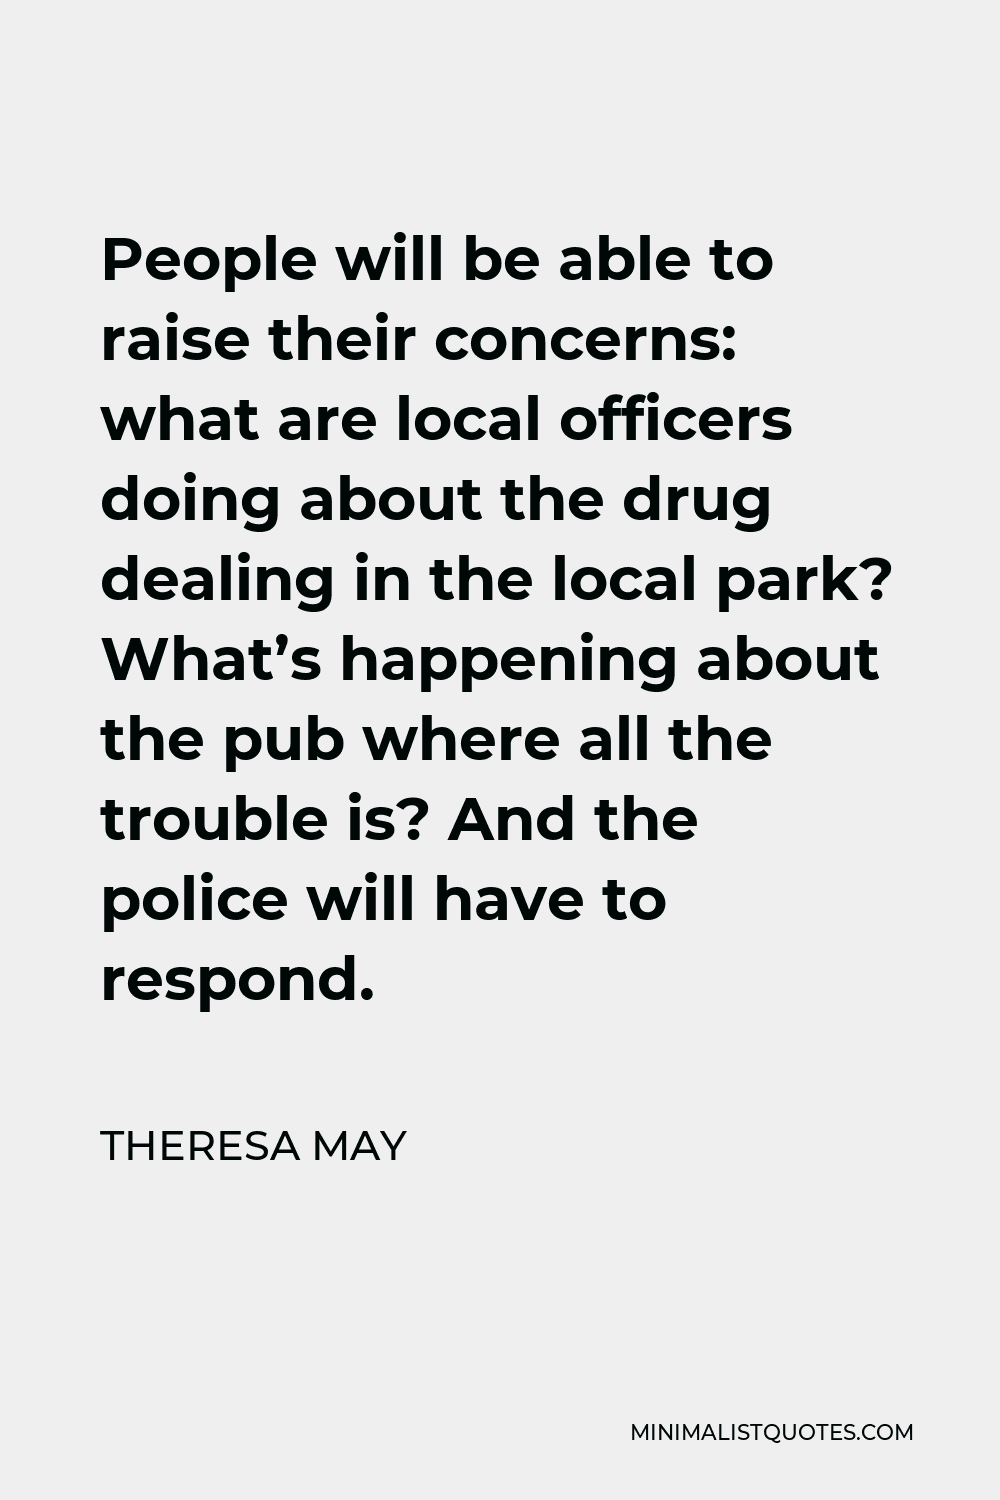 Theresa May Quote - People will be able to raise their concerns: what are local officers doing about the drug dealing in the local park? What’s happening about the pub where all the trouble is? And the police will have to respond.